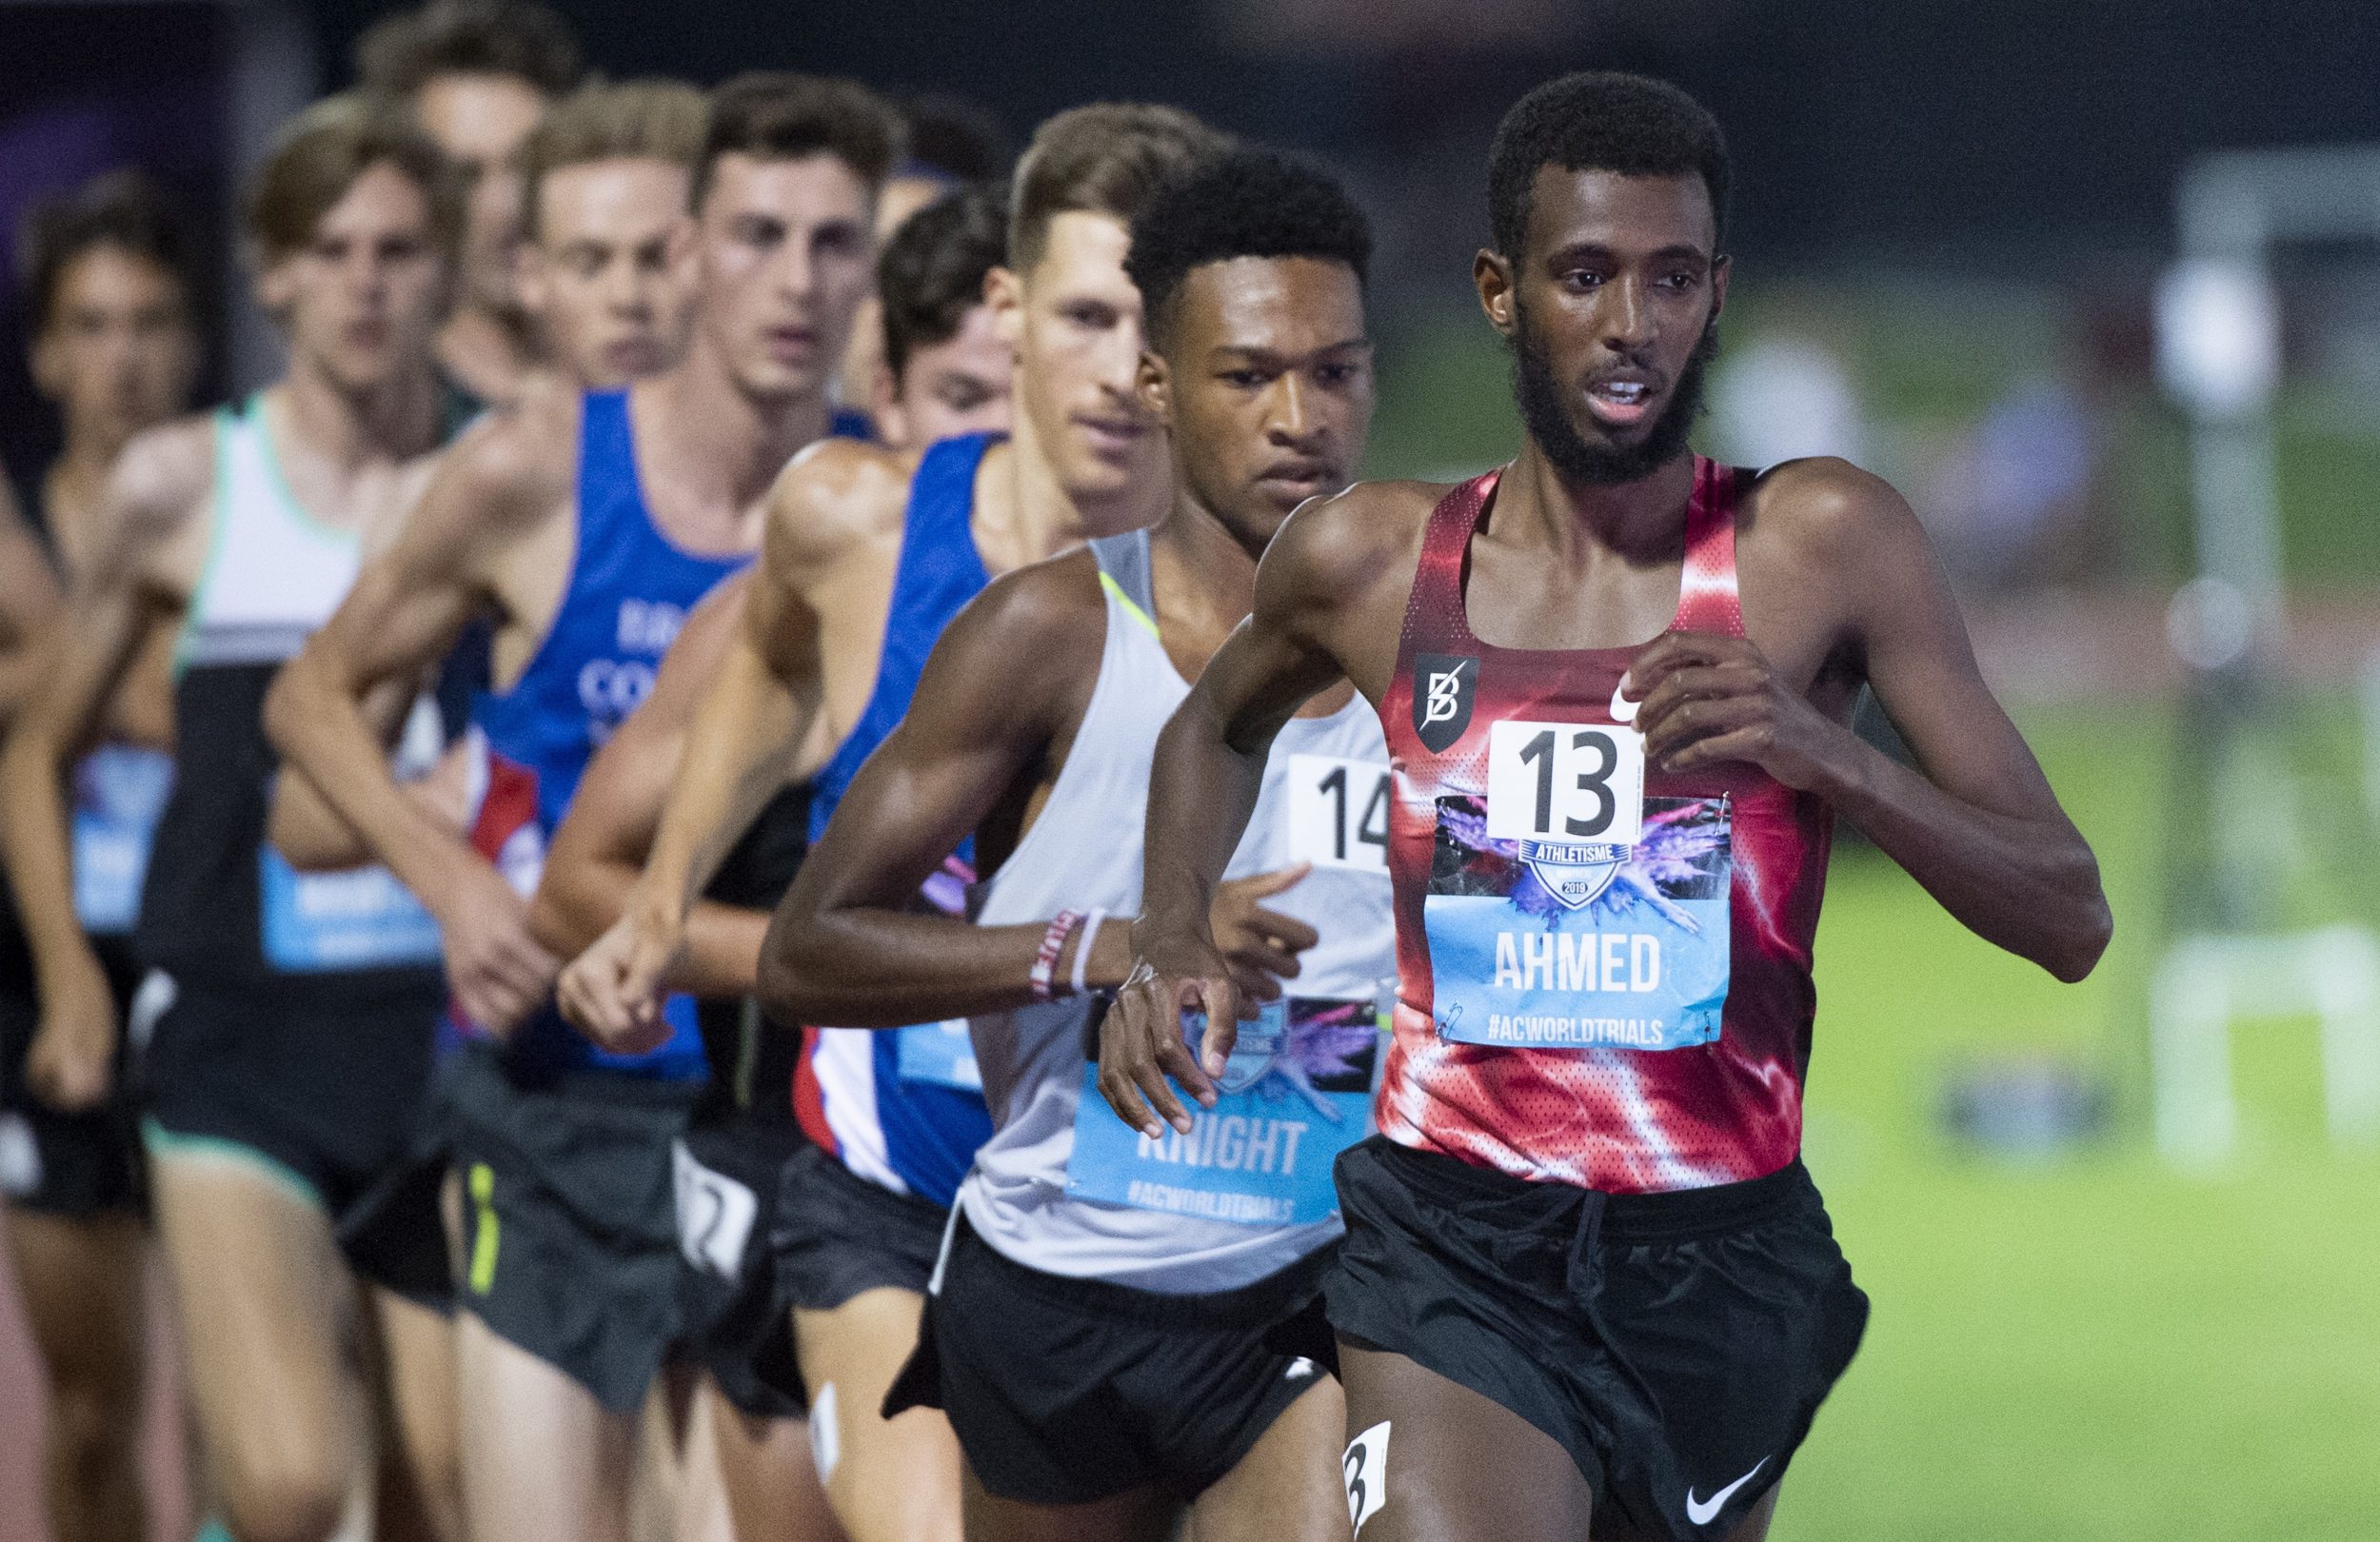 Mo Ahmed leads the pack at the 2019 Canadian Championships